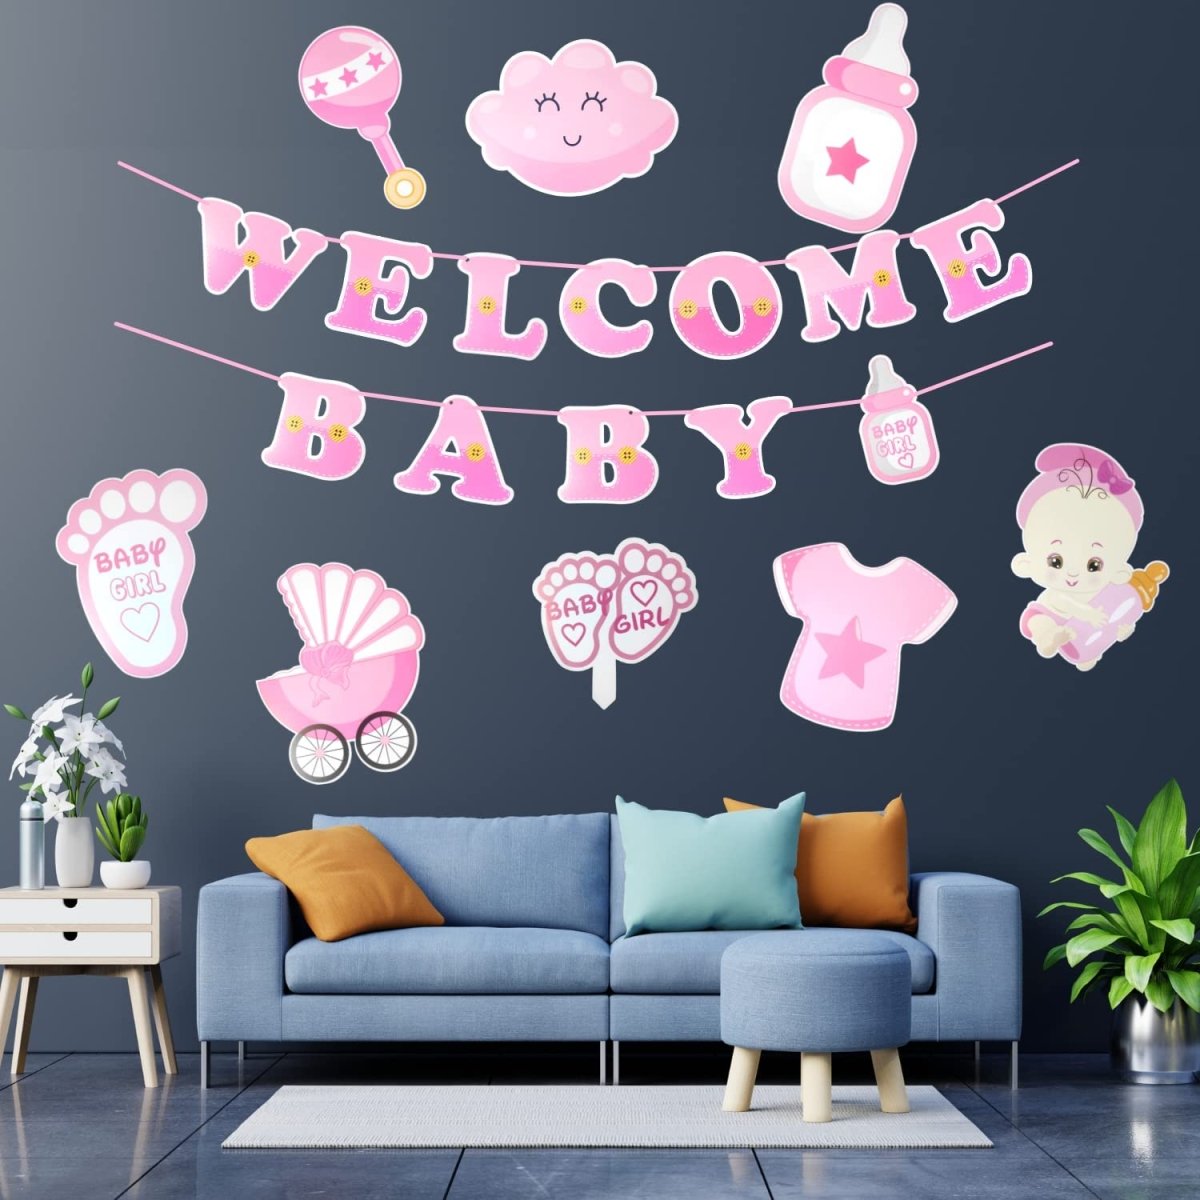 Welcome Little Princess Decor | Balloon Decoration in Indore | TogetherV